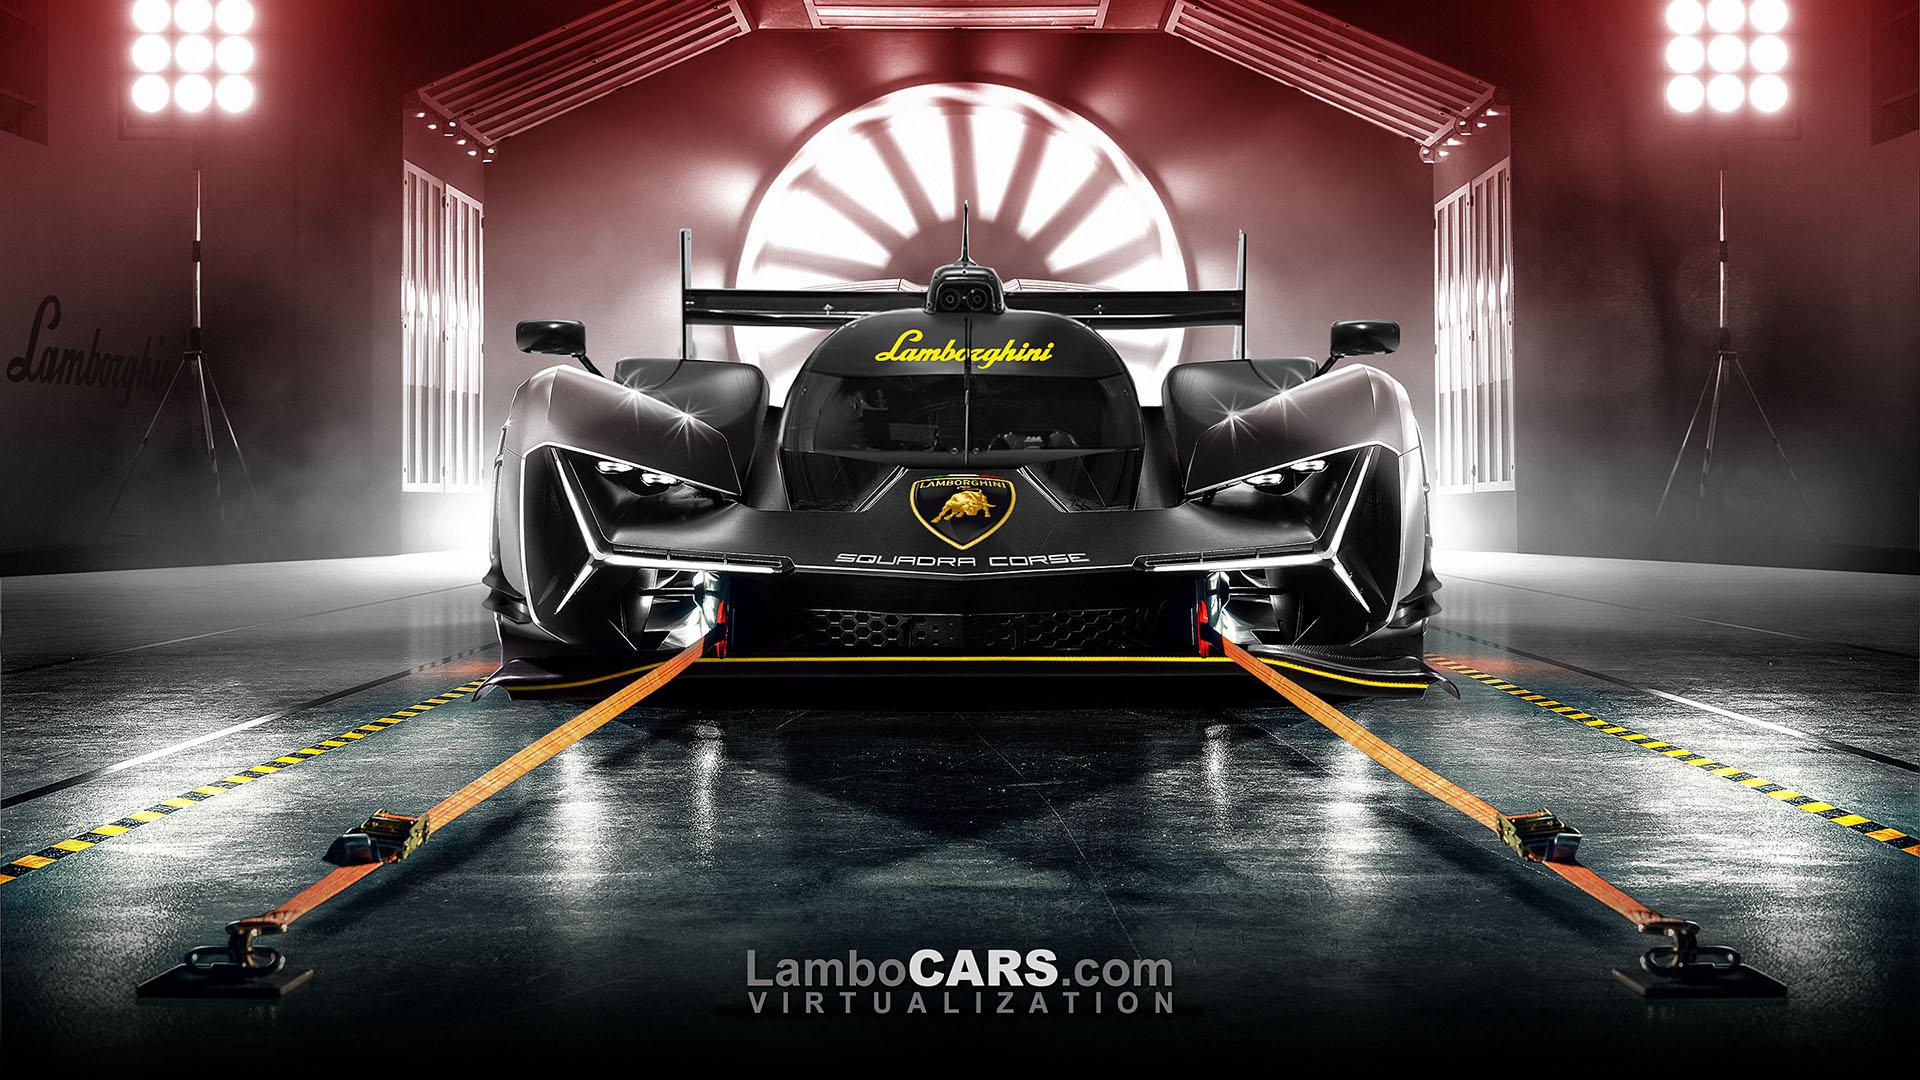 will officially have an LMDh hybrid sports car for the 2024